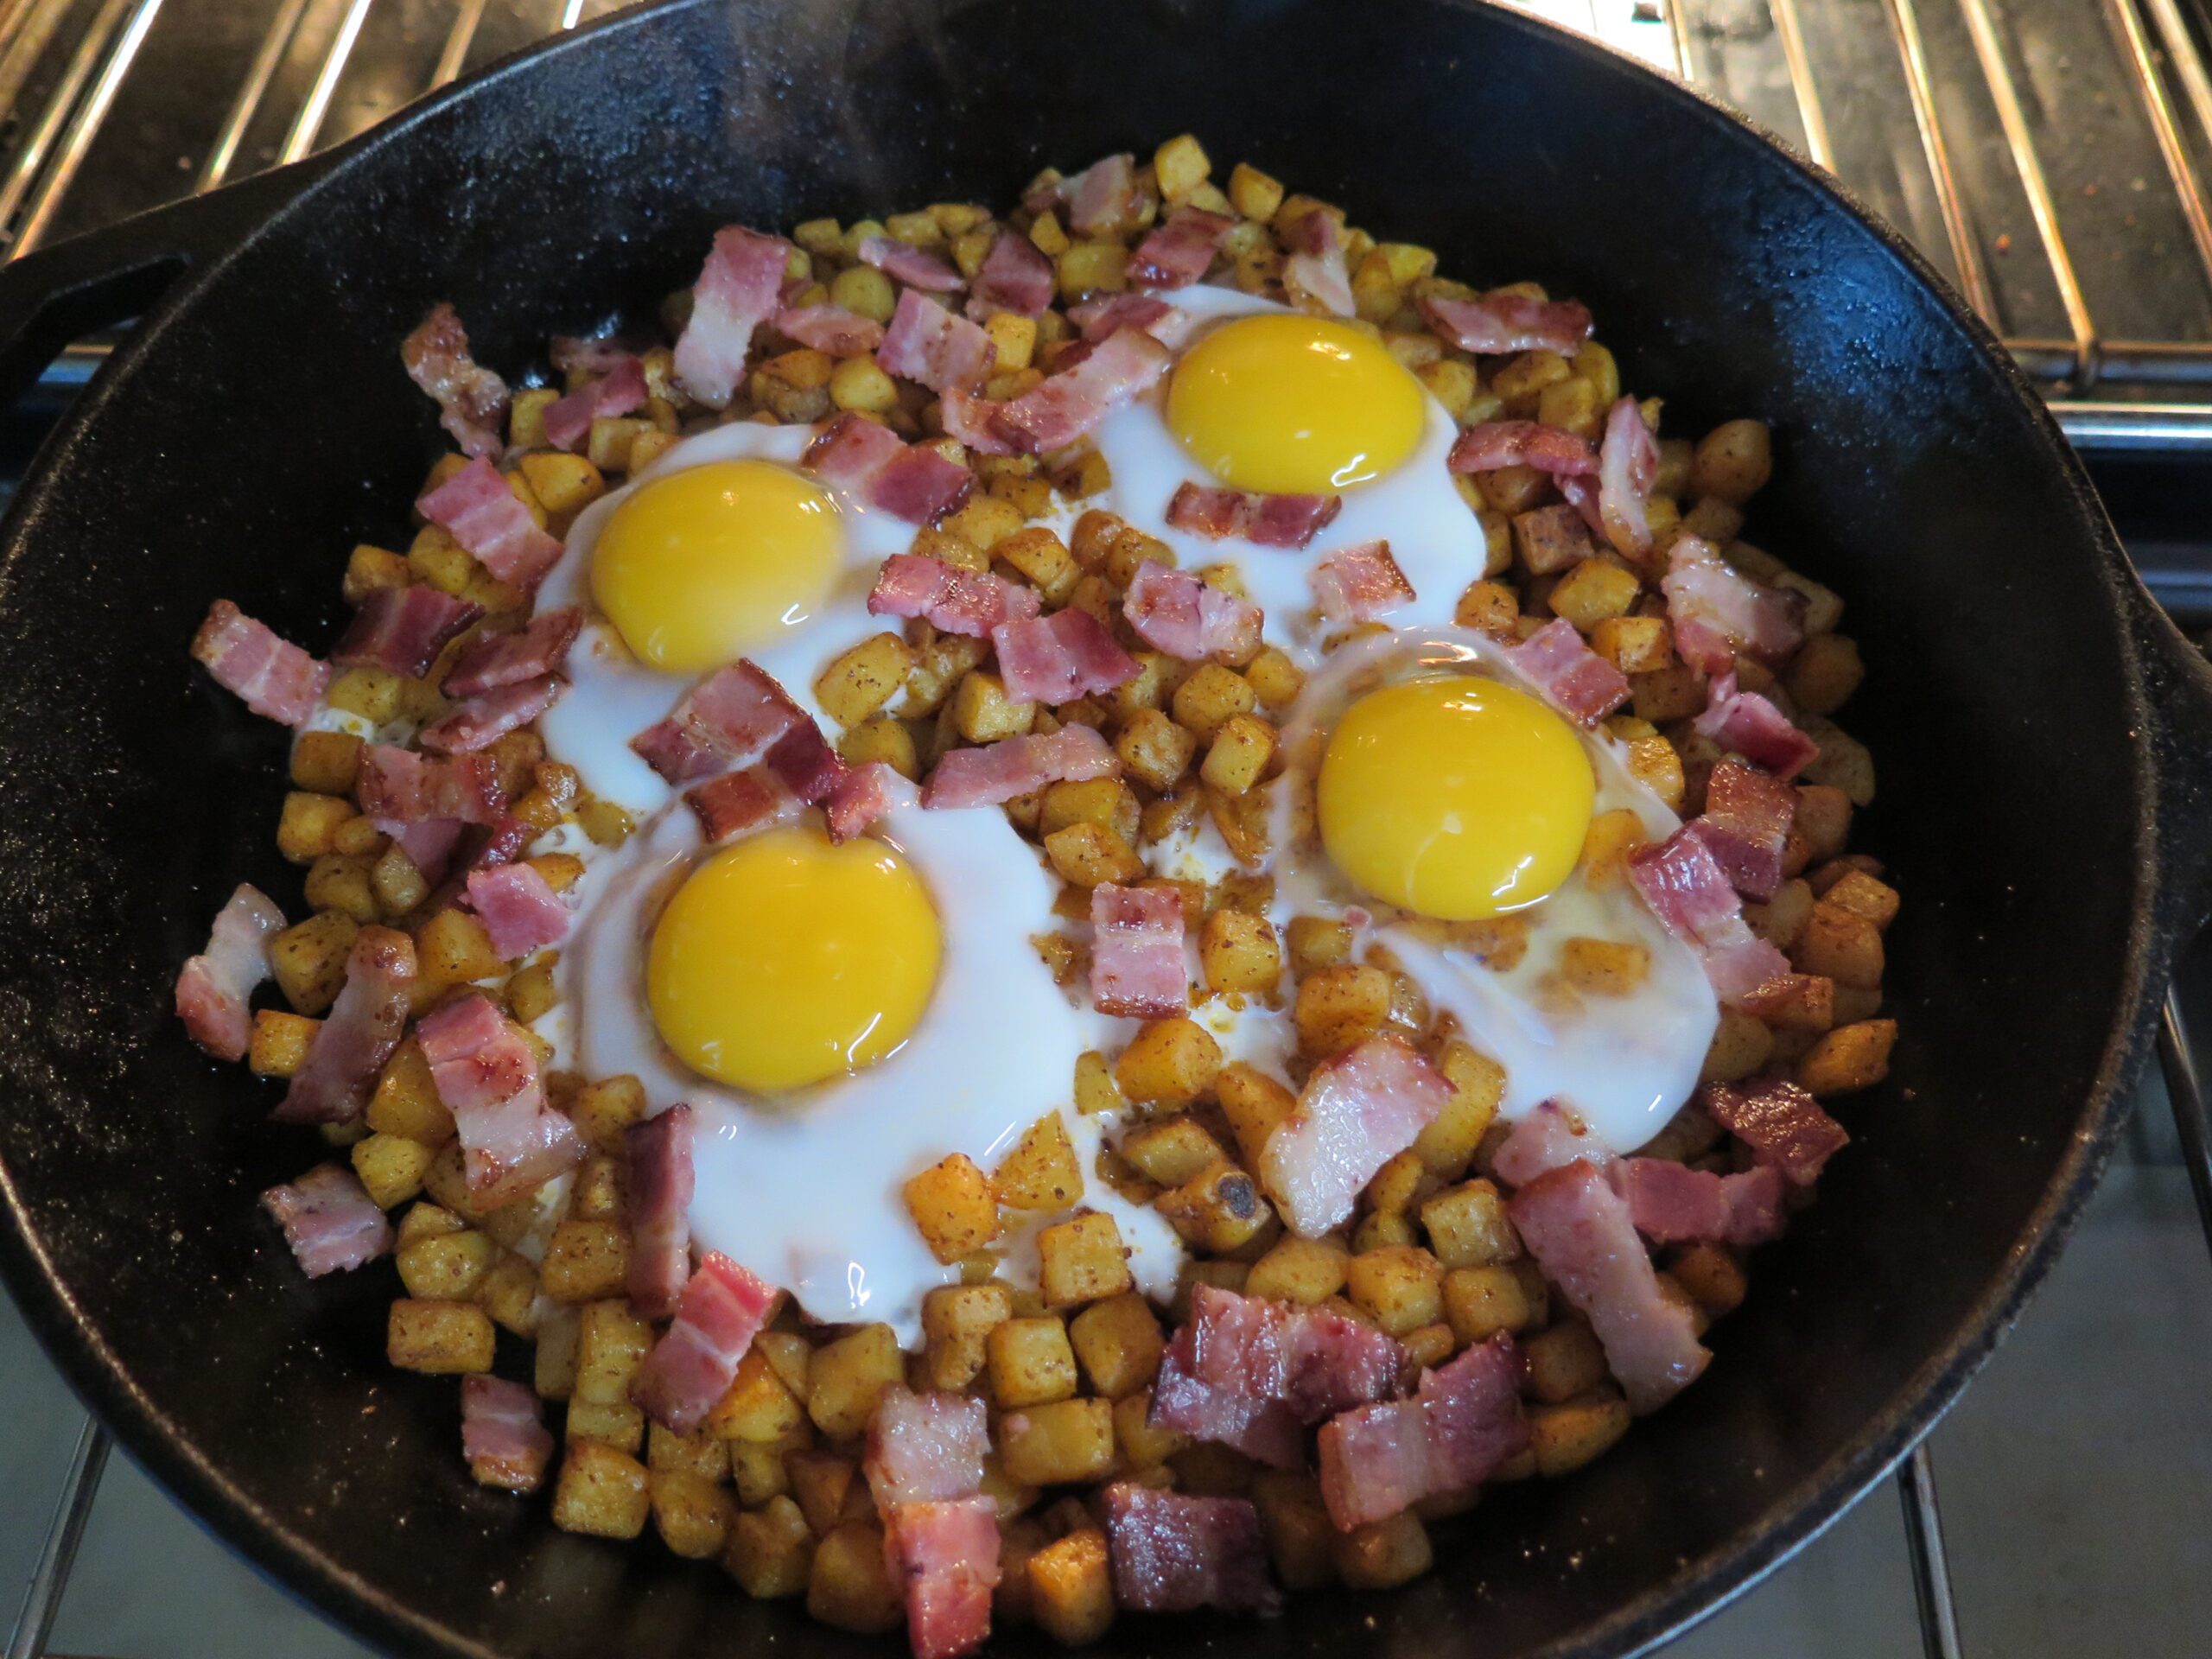 Add bacon to the cooked eggs and hash browns